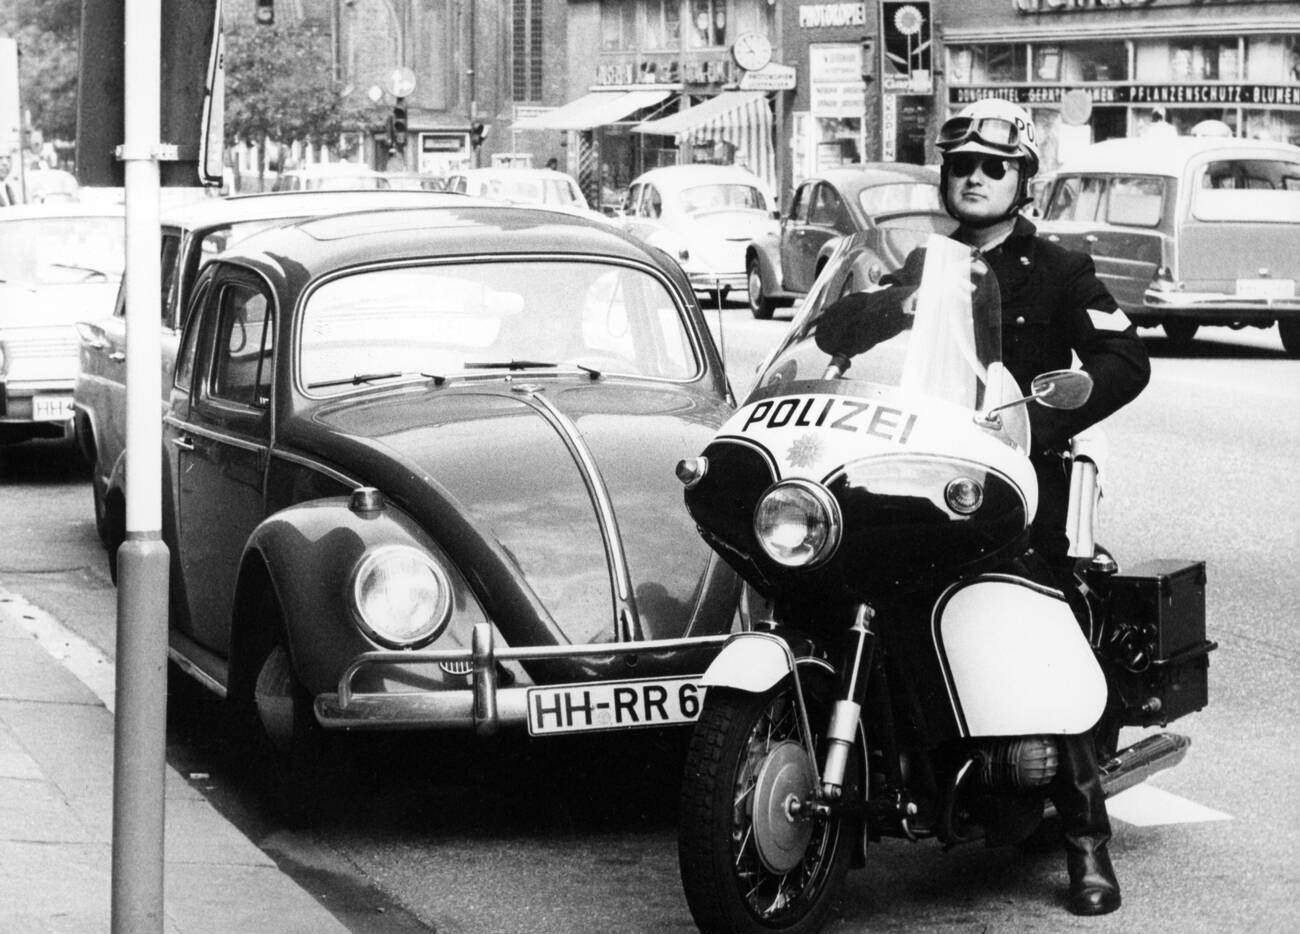 A traffic police officer on a motorcycle in Hamburg, Germany in the 1970s.